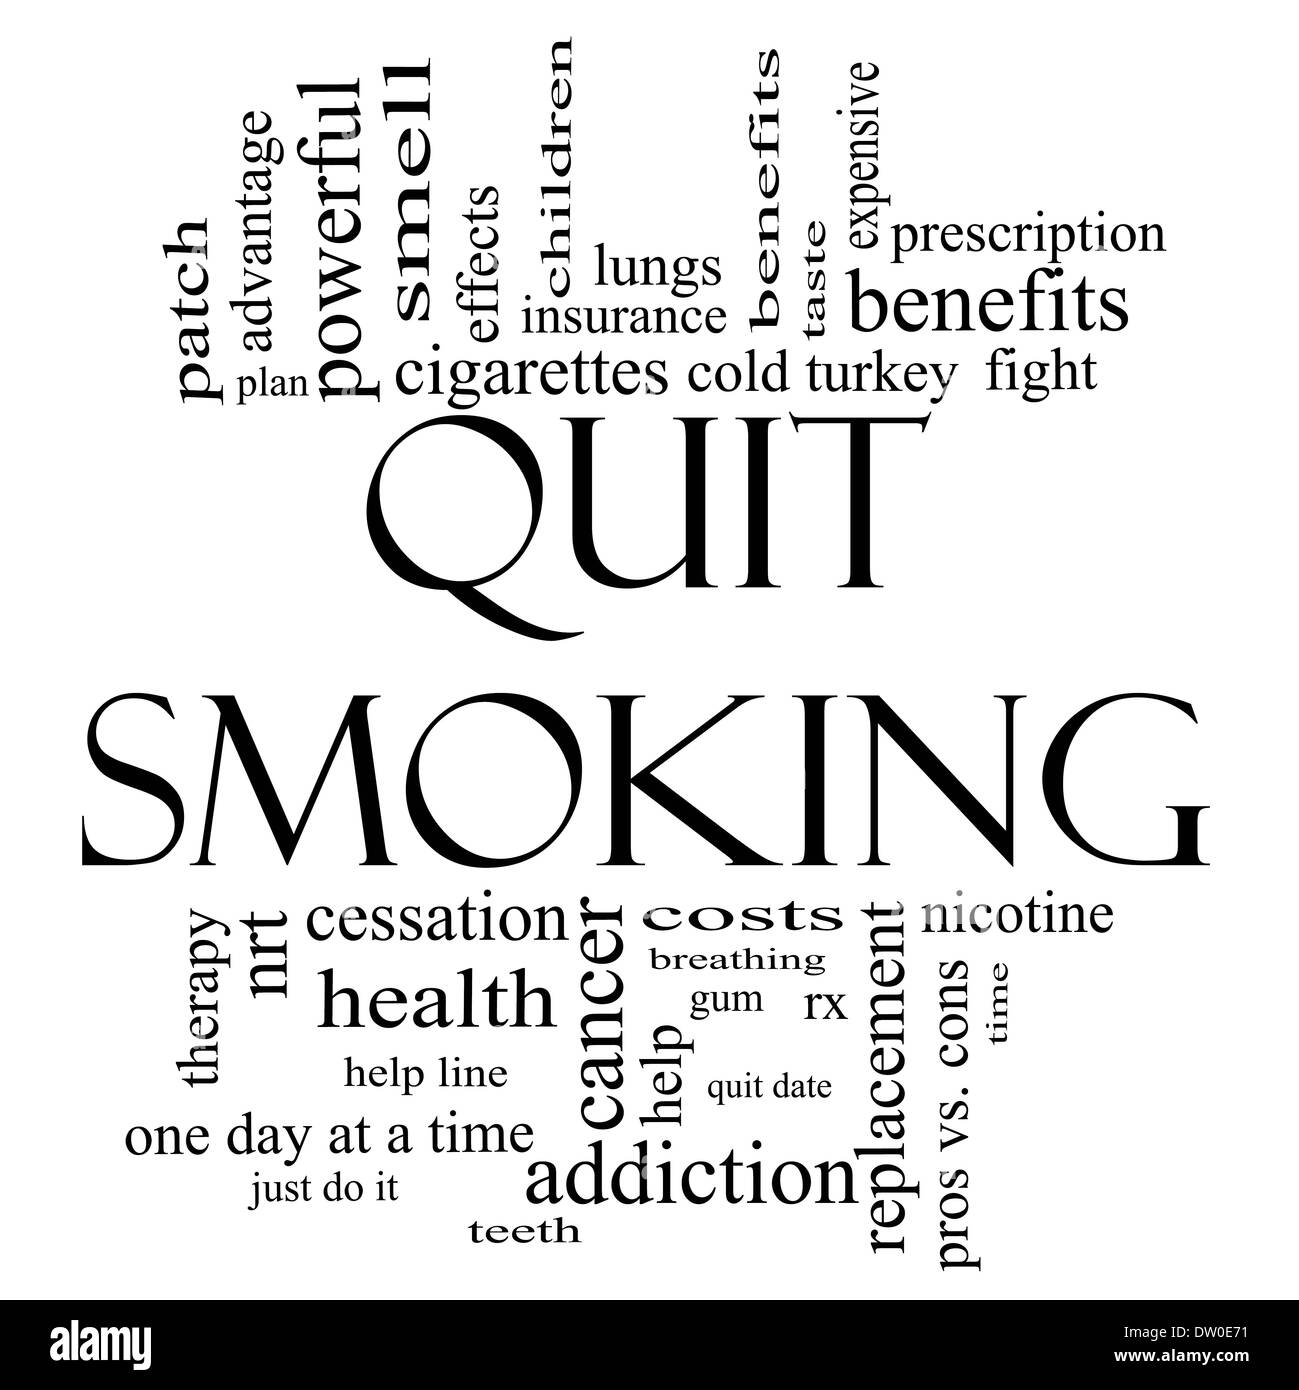 Quit Smoking Word Cloud Concept in black and white with great terms such as nicotine, cold turkey, quit date, patch and more. Stock Photo